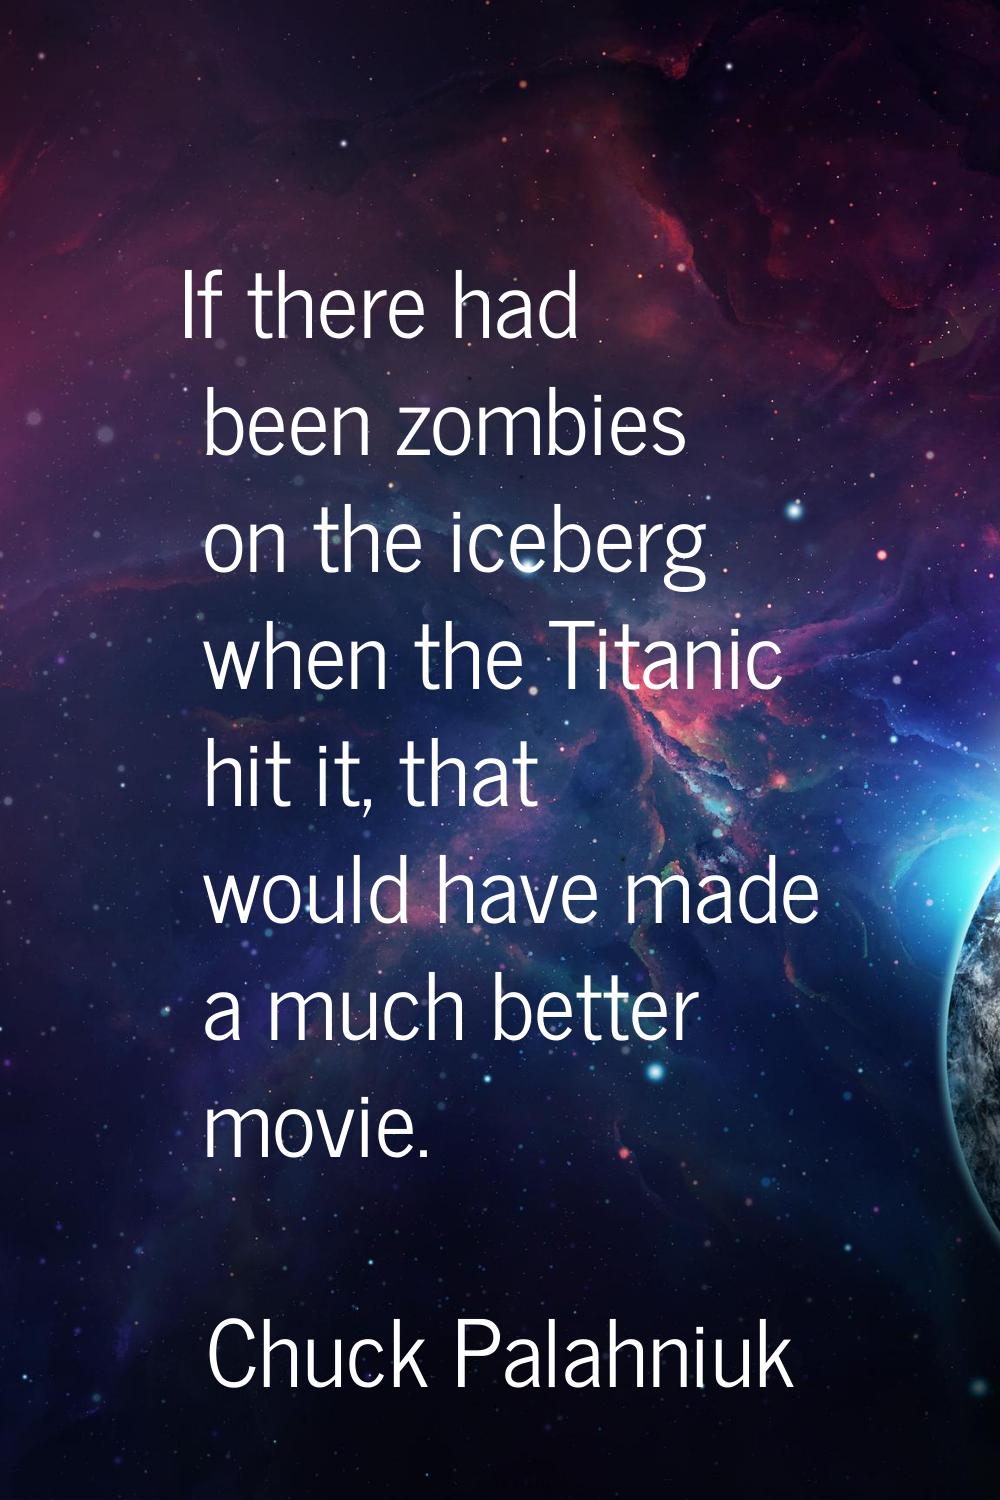 If there had been zombies on the iceberg when the Titanic hit it, that would have made a much bette